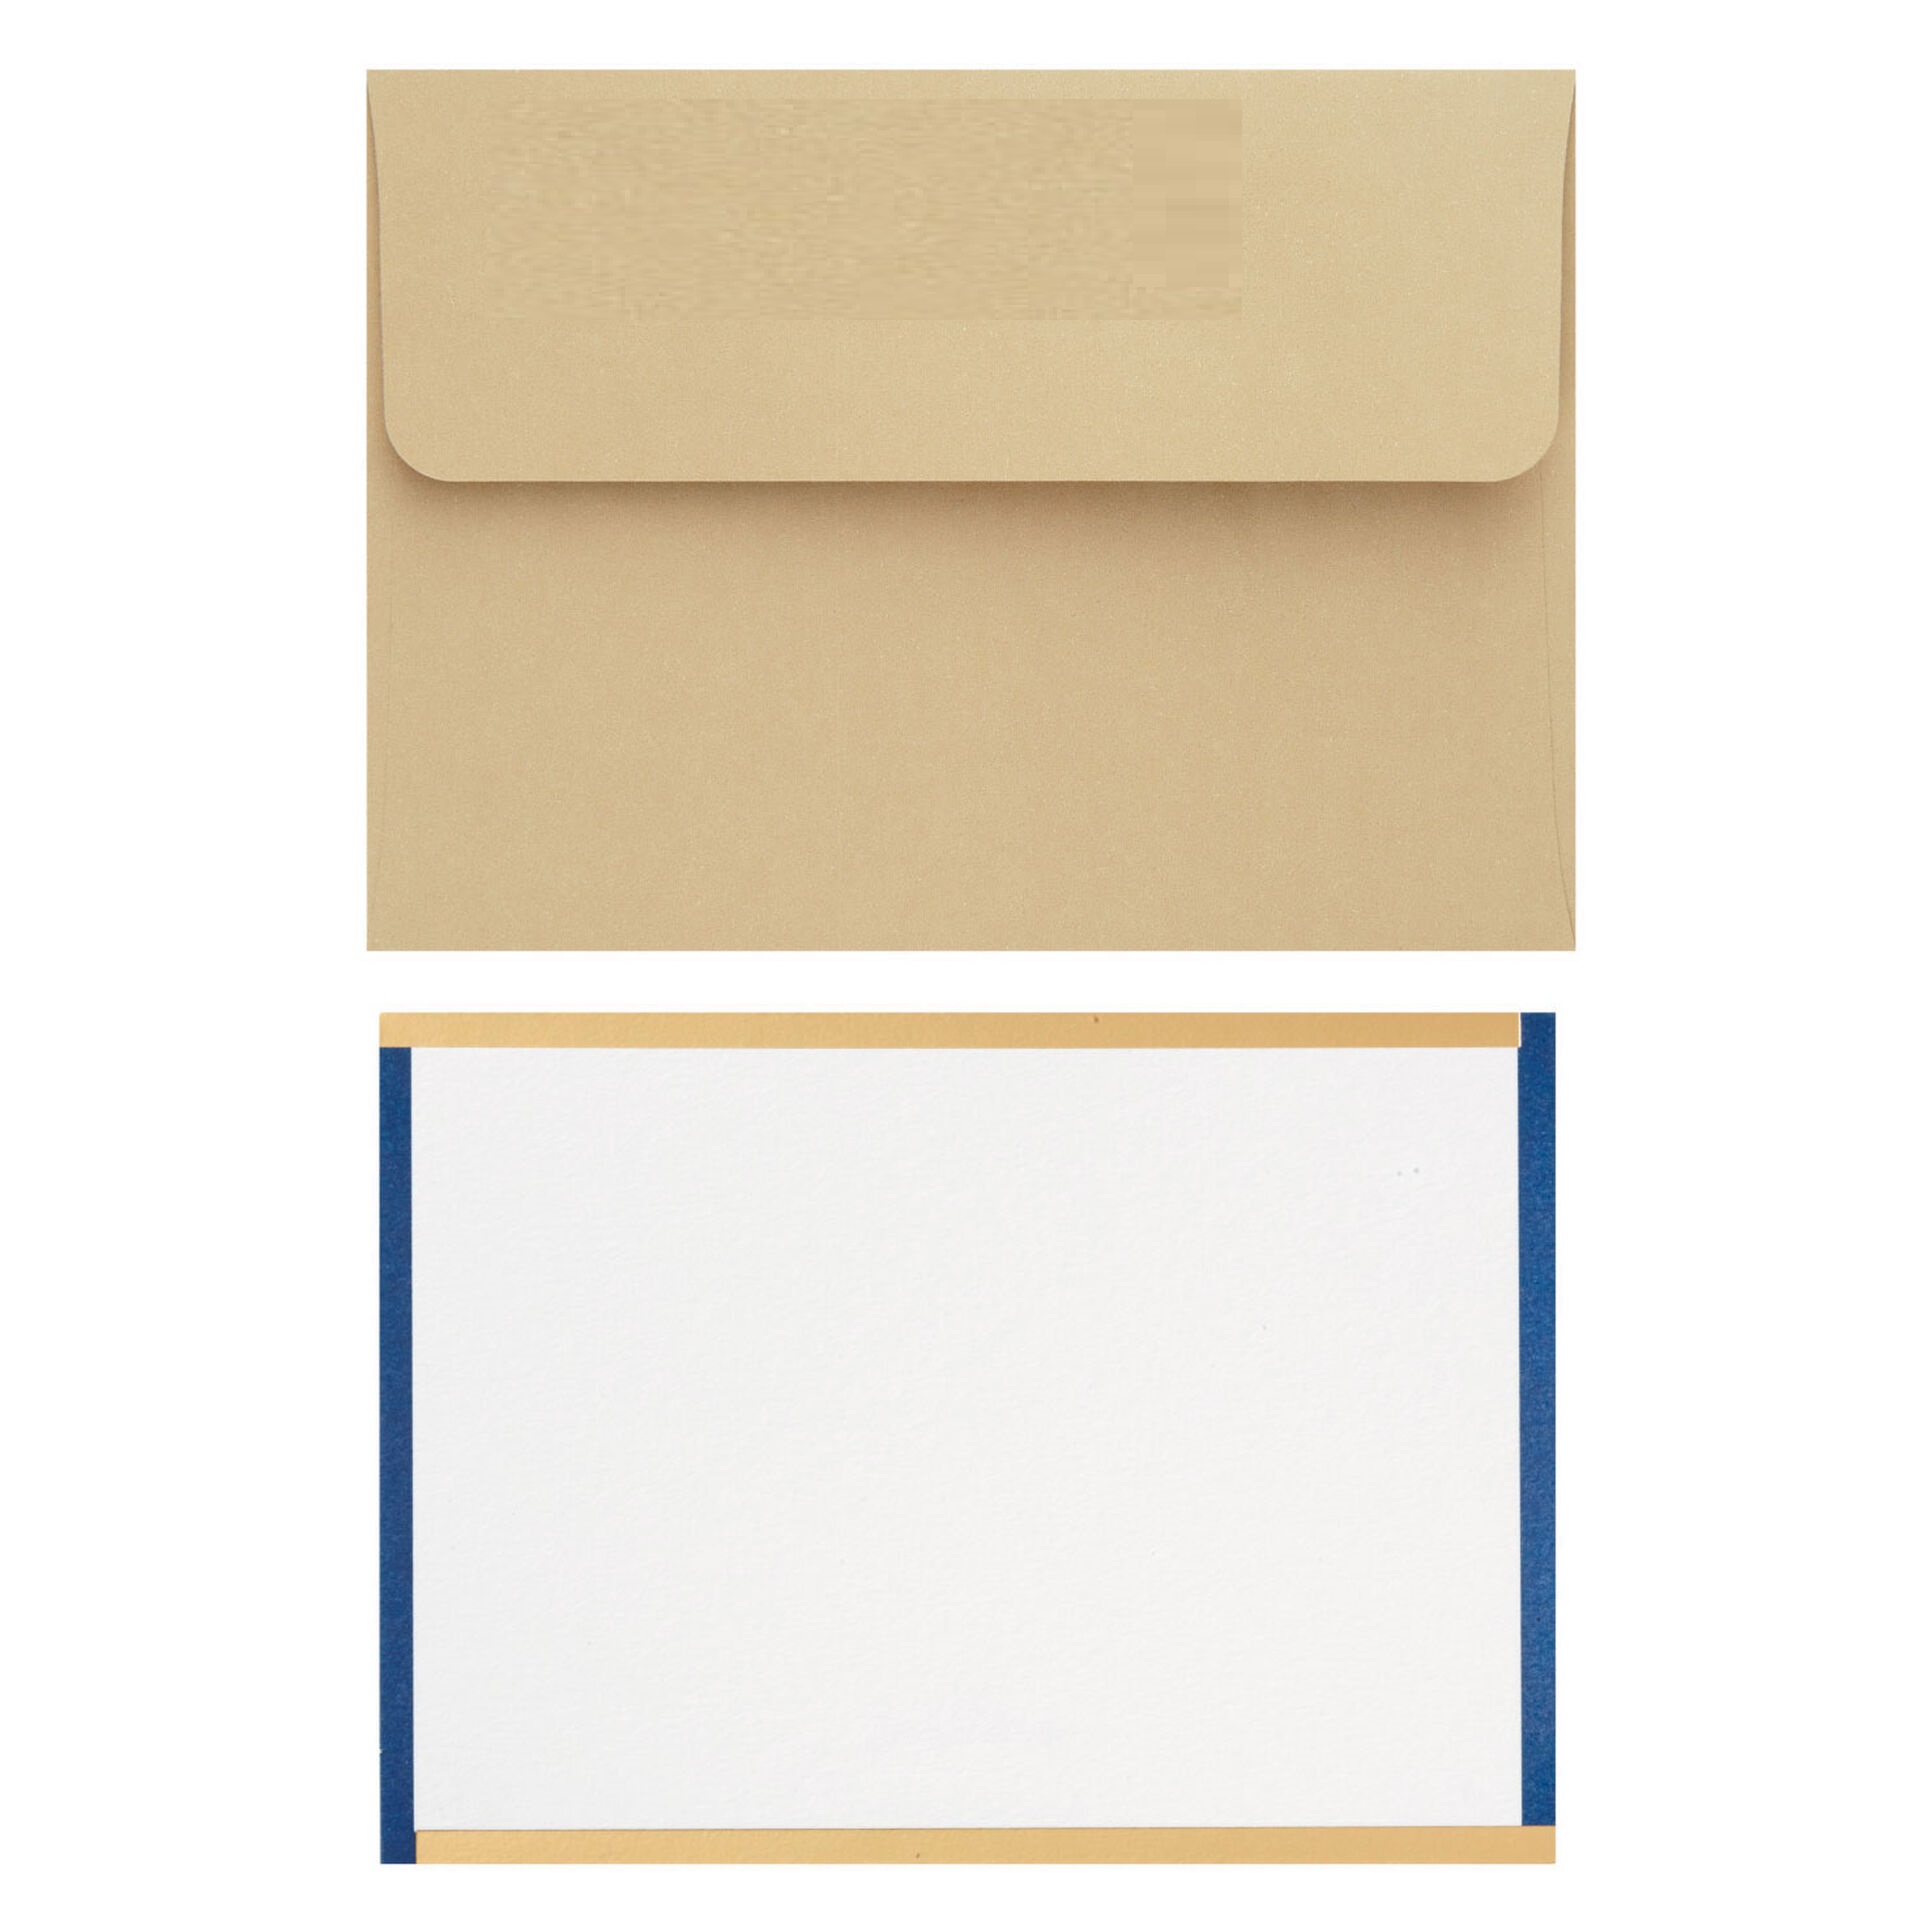 Assorted-Blank-Flat-Note-Cards-in-Caddy_1SOM3872_03